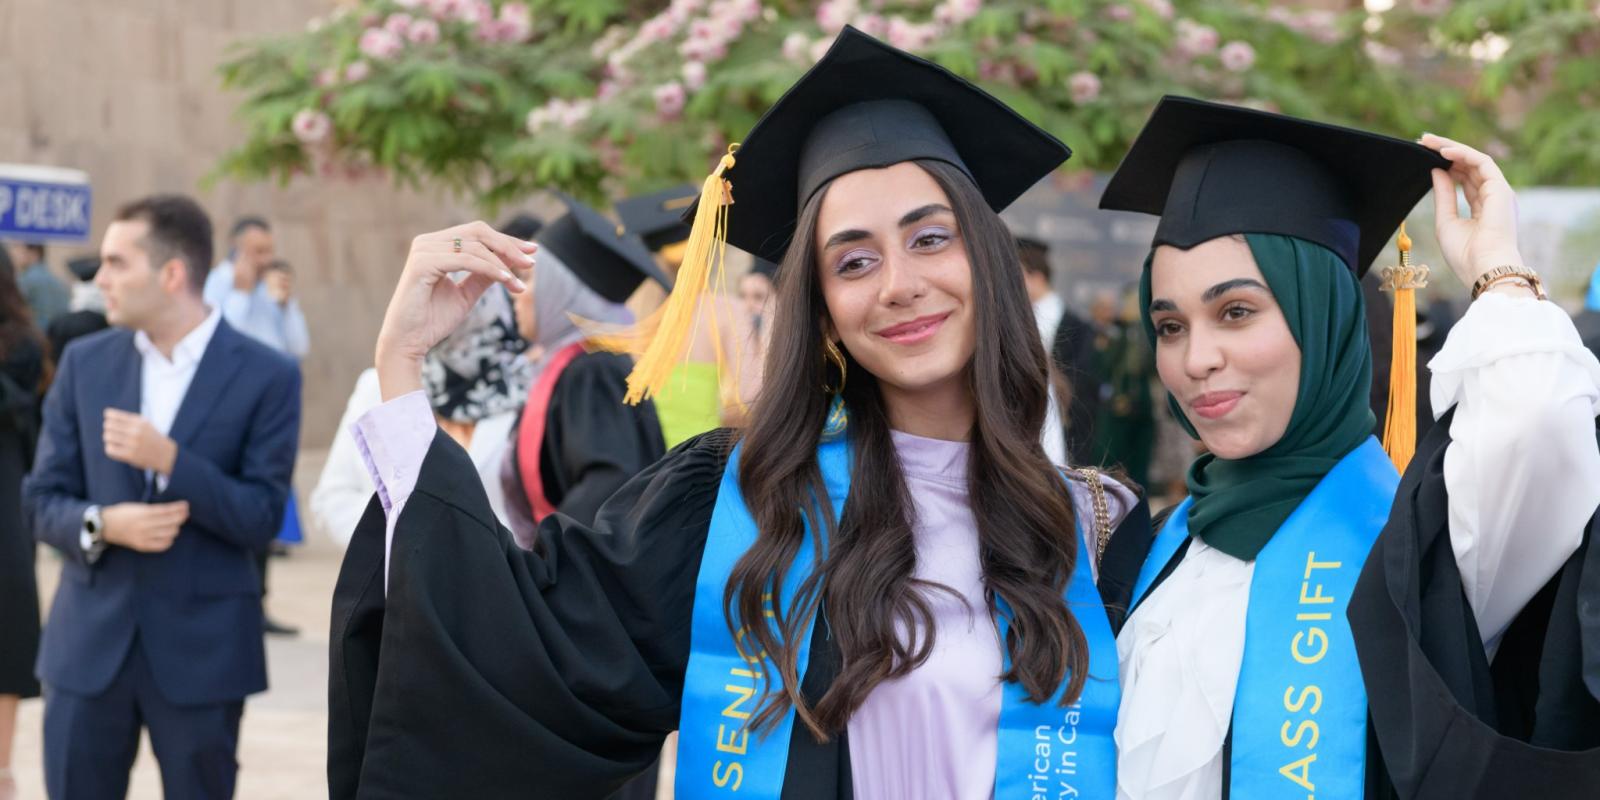 Two female graduates in their caps and gowns